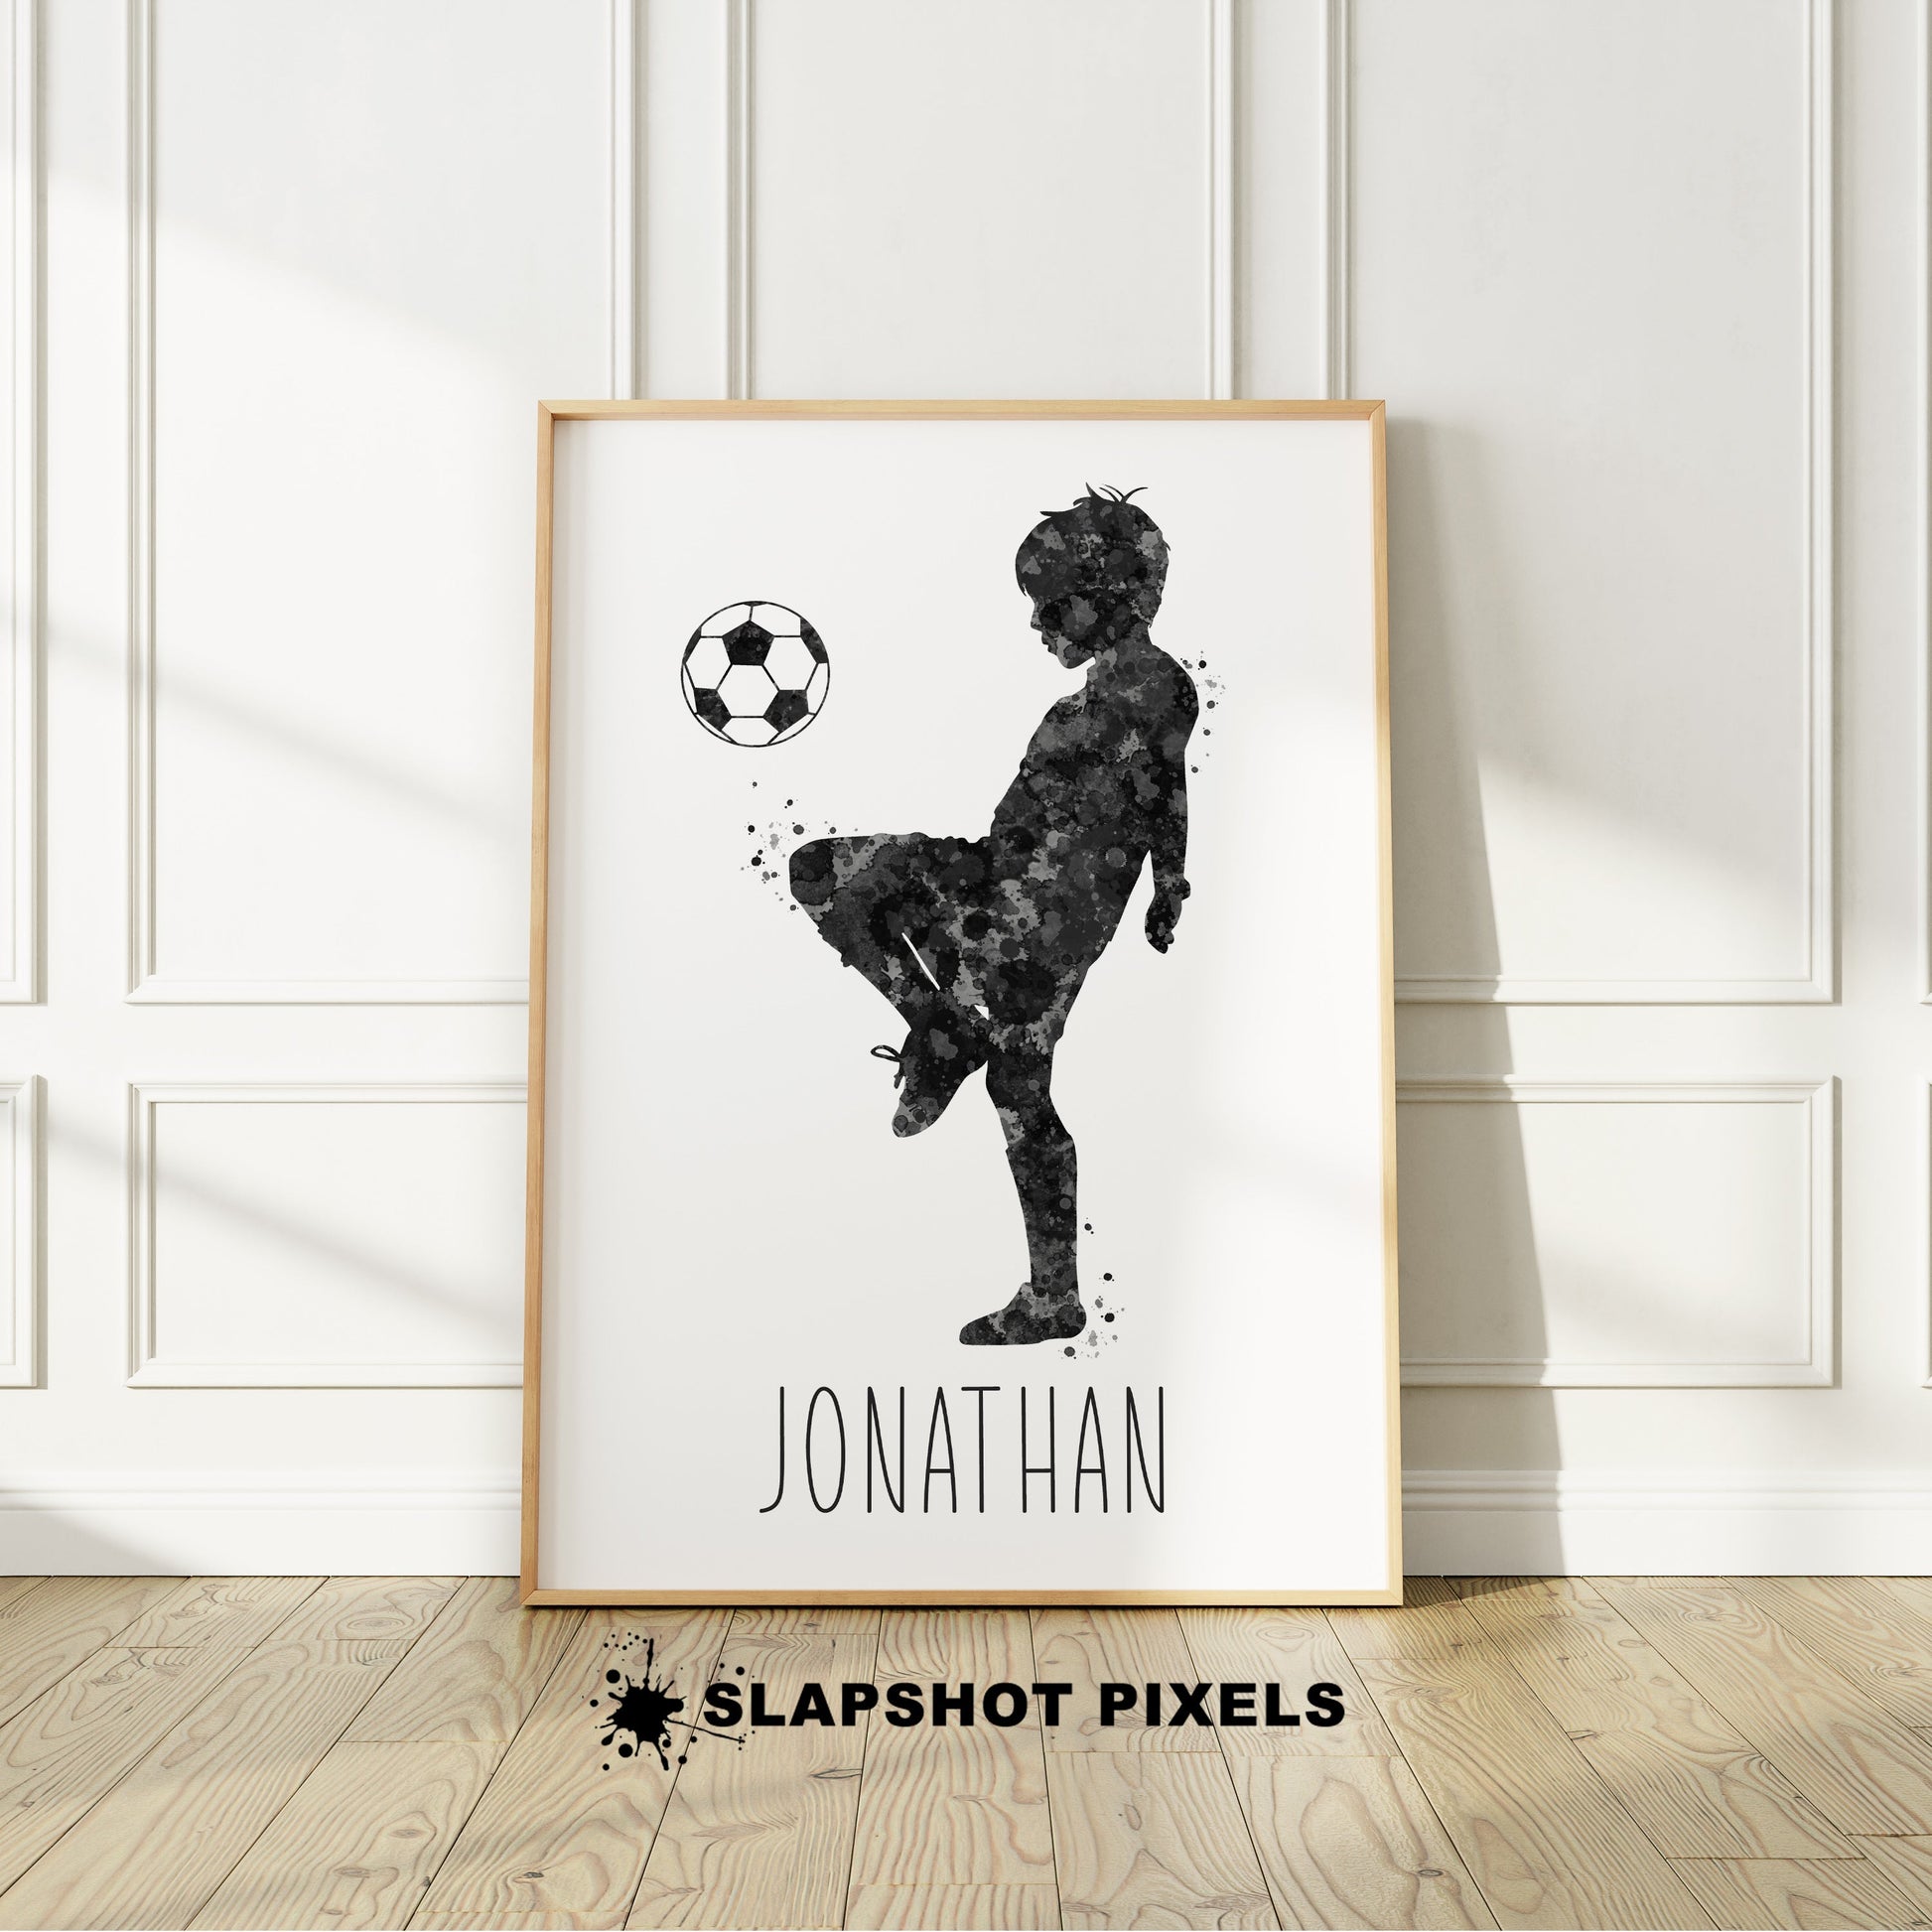 Personalized soccer poster showing little boy soccer player bouncing soccer ball on his knee with custom name under player. Designed in yellow and black watercolor splatters. Perfect soccer gifts for boys, soccer team gifts, soccer coach gift, soccer wall art décor, football prints and soccer bedroom.